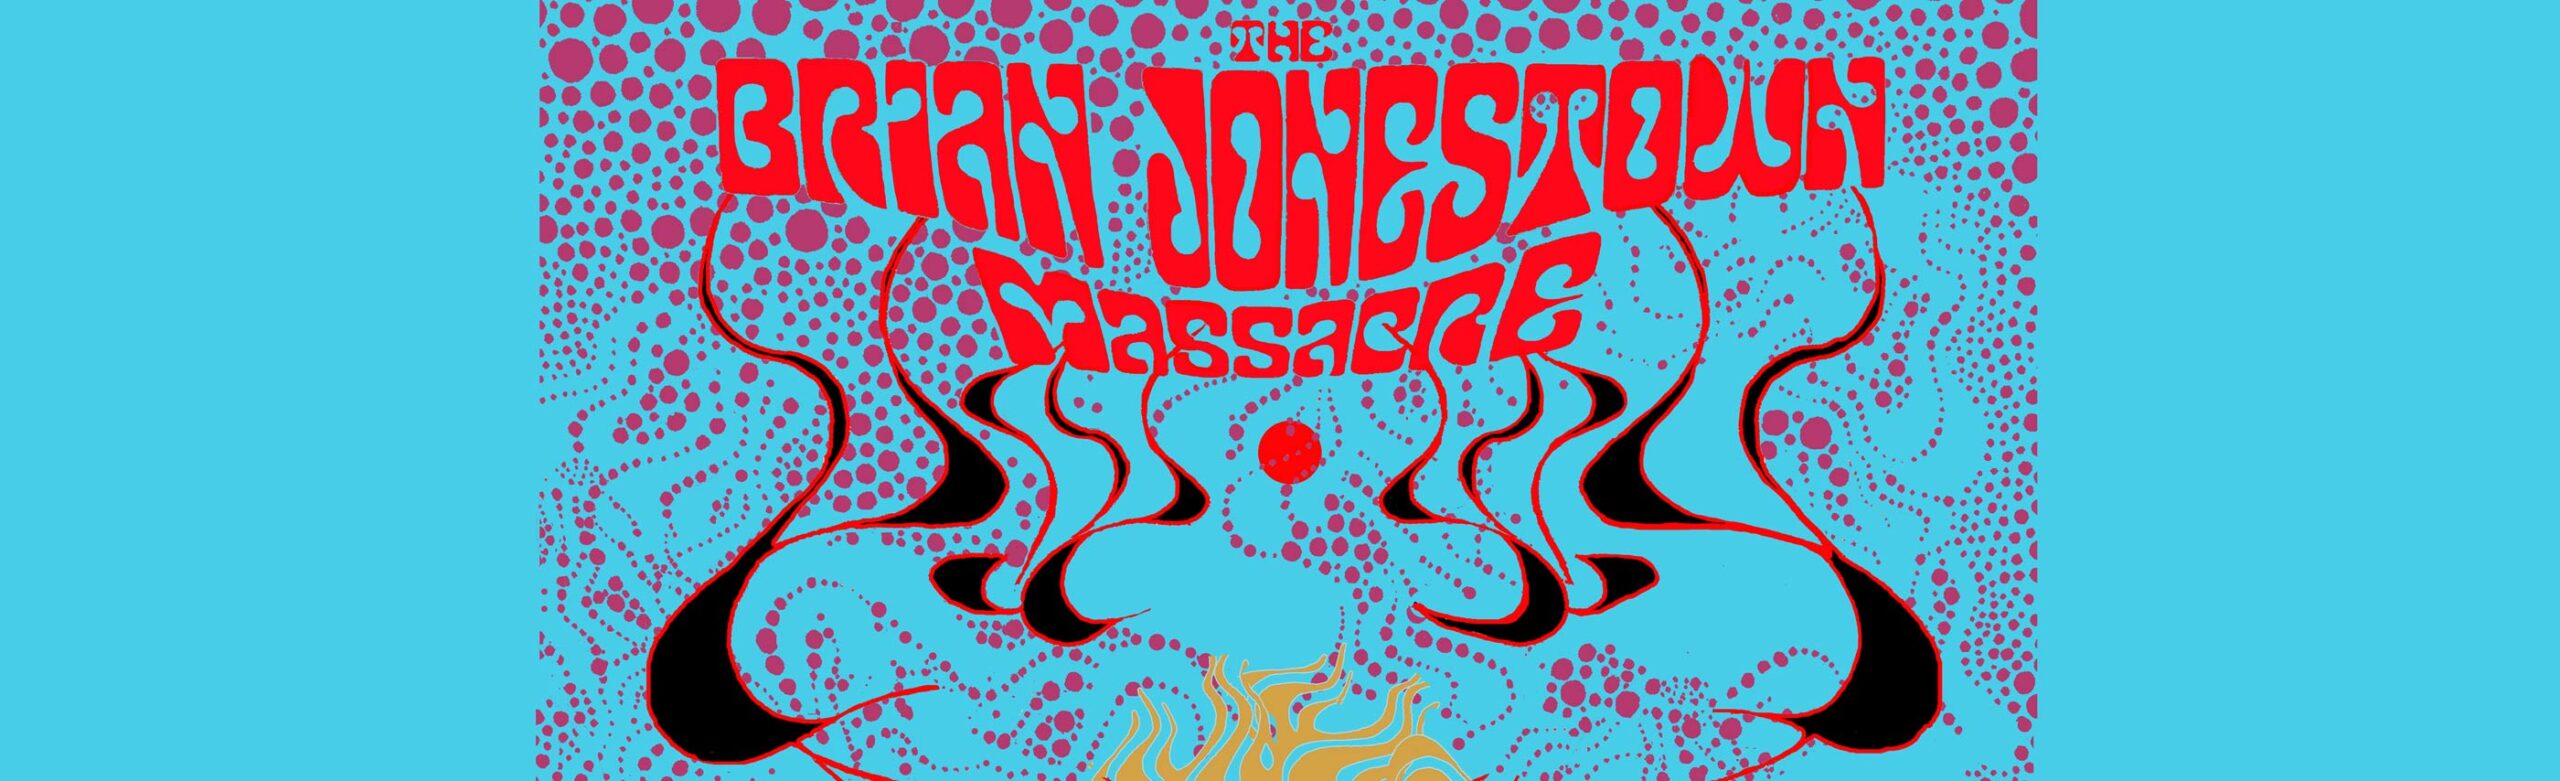 The Brian Jonestown Massacre Announces Concerts at The ELM and The Top Hat Image